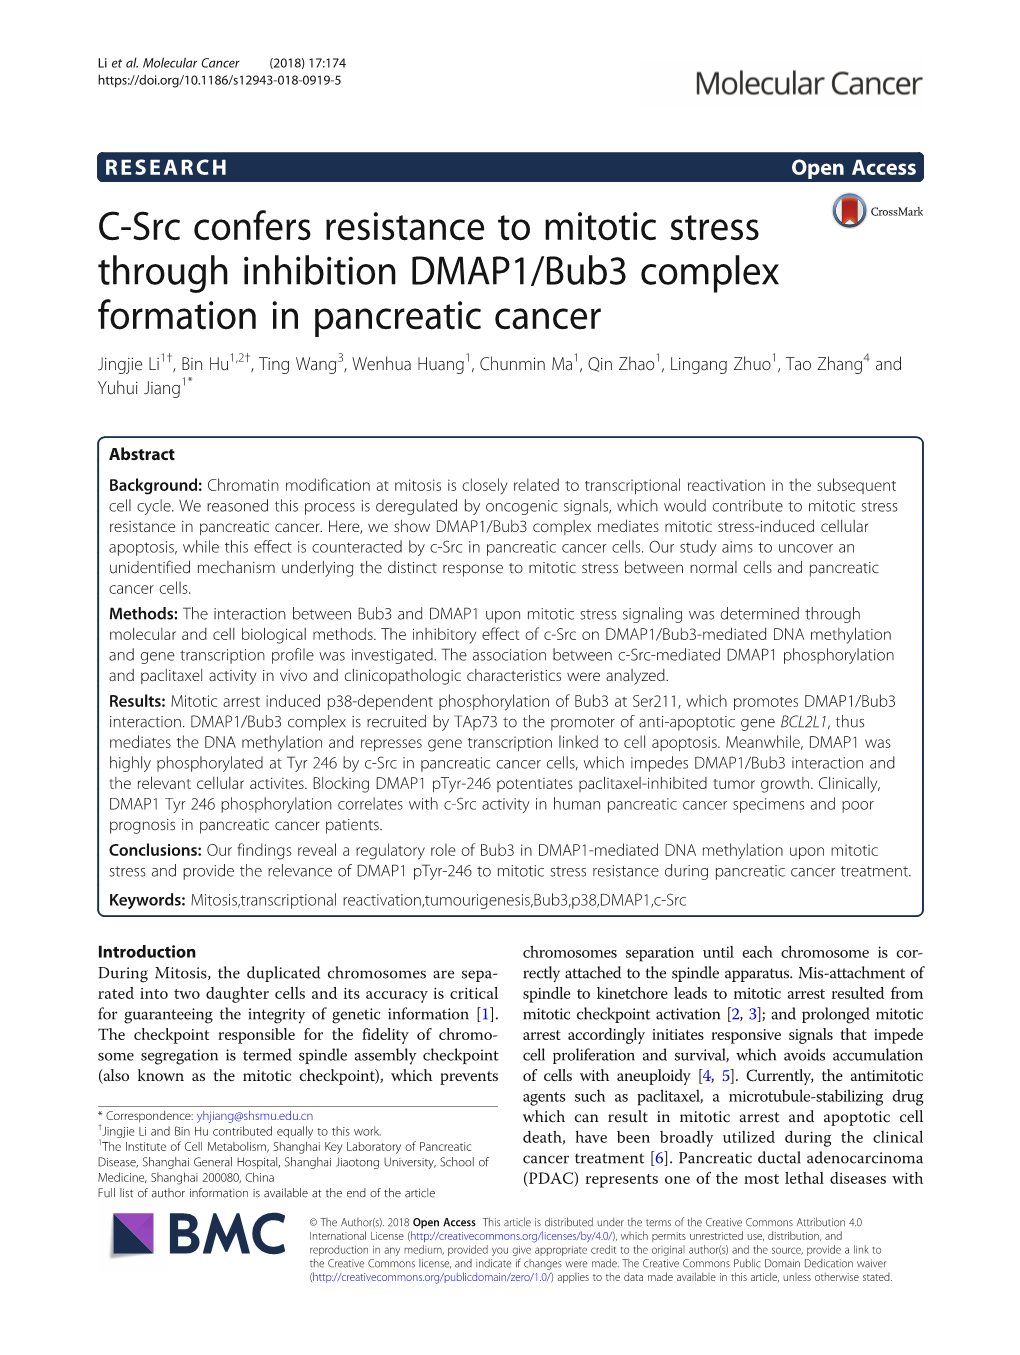 C-Src Confers Resistance to Mitotic Stress Through Inhibition DMAP1/Bub3 Complex Formation in Pancreatic Cancer